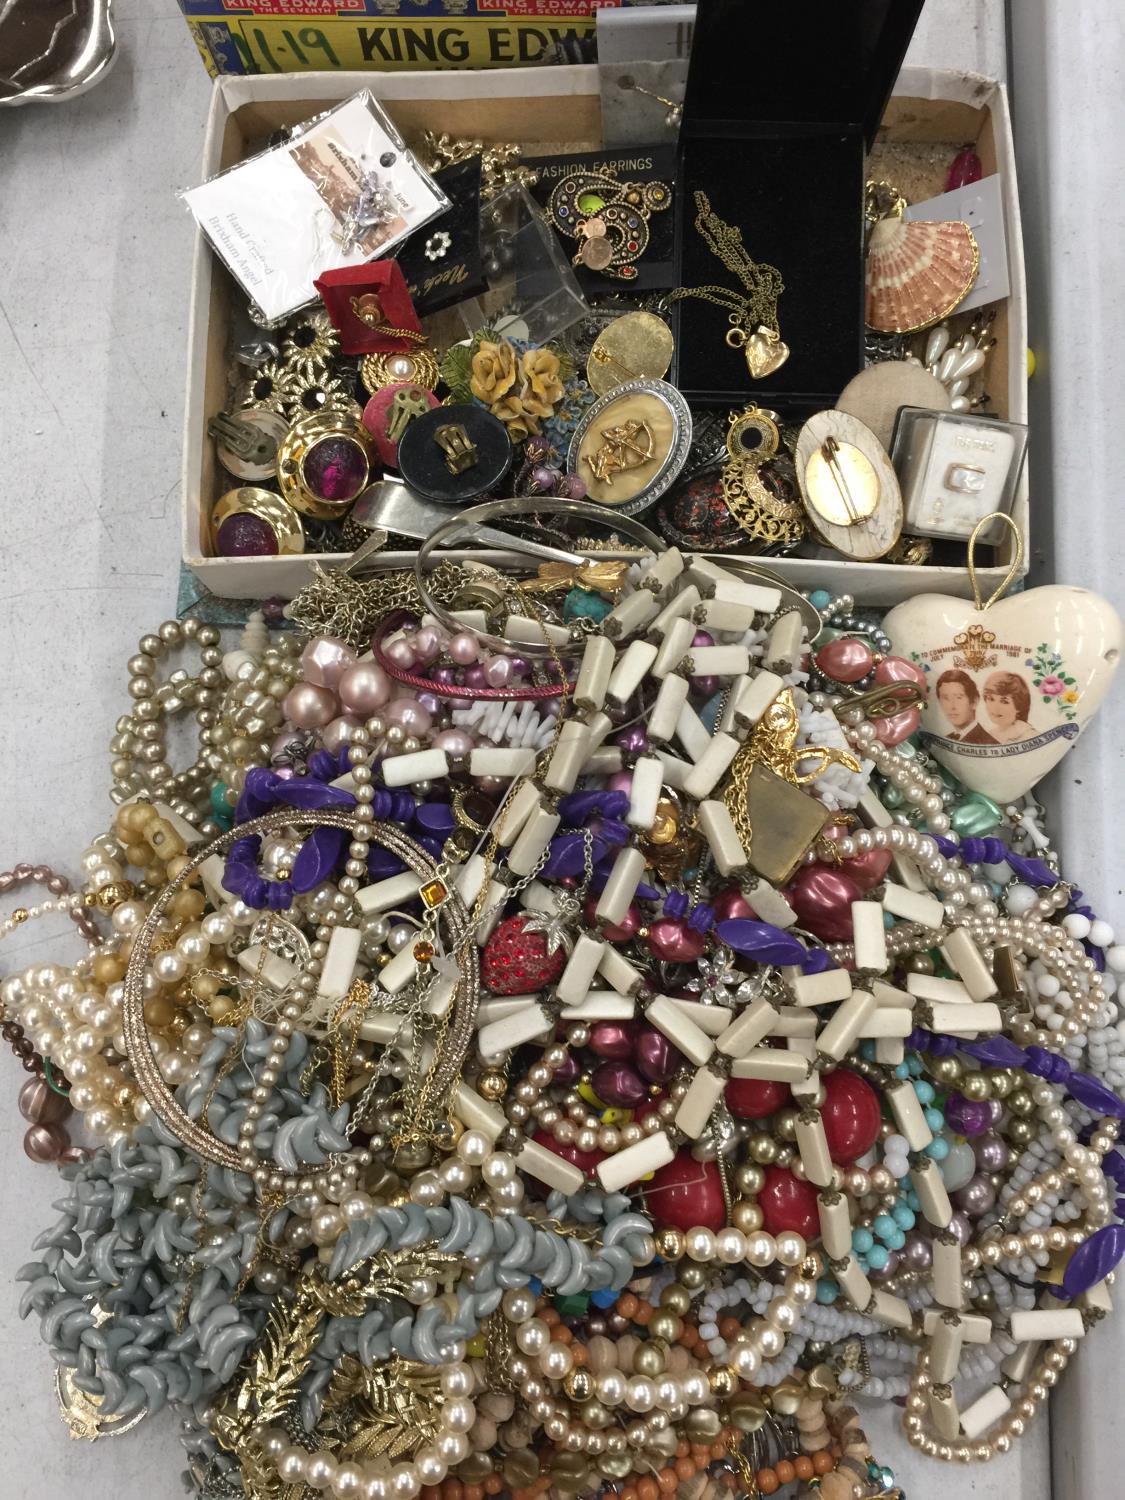 A LARGE QUANTITY OF COSTUME JEWELLERY TO INCLUDE BROOCHES, NECKLACES, EARRINGS, BANGLES, BEADS, ETC - Image 3 of 3